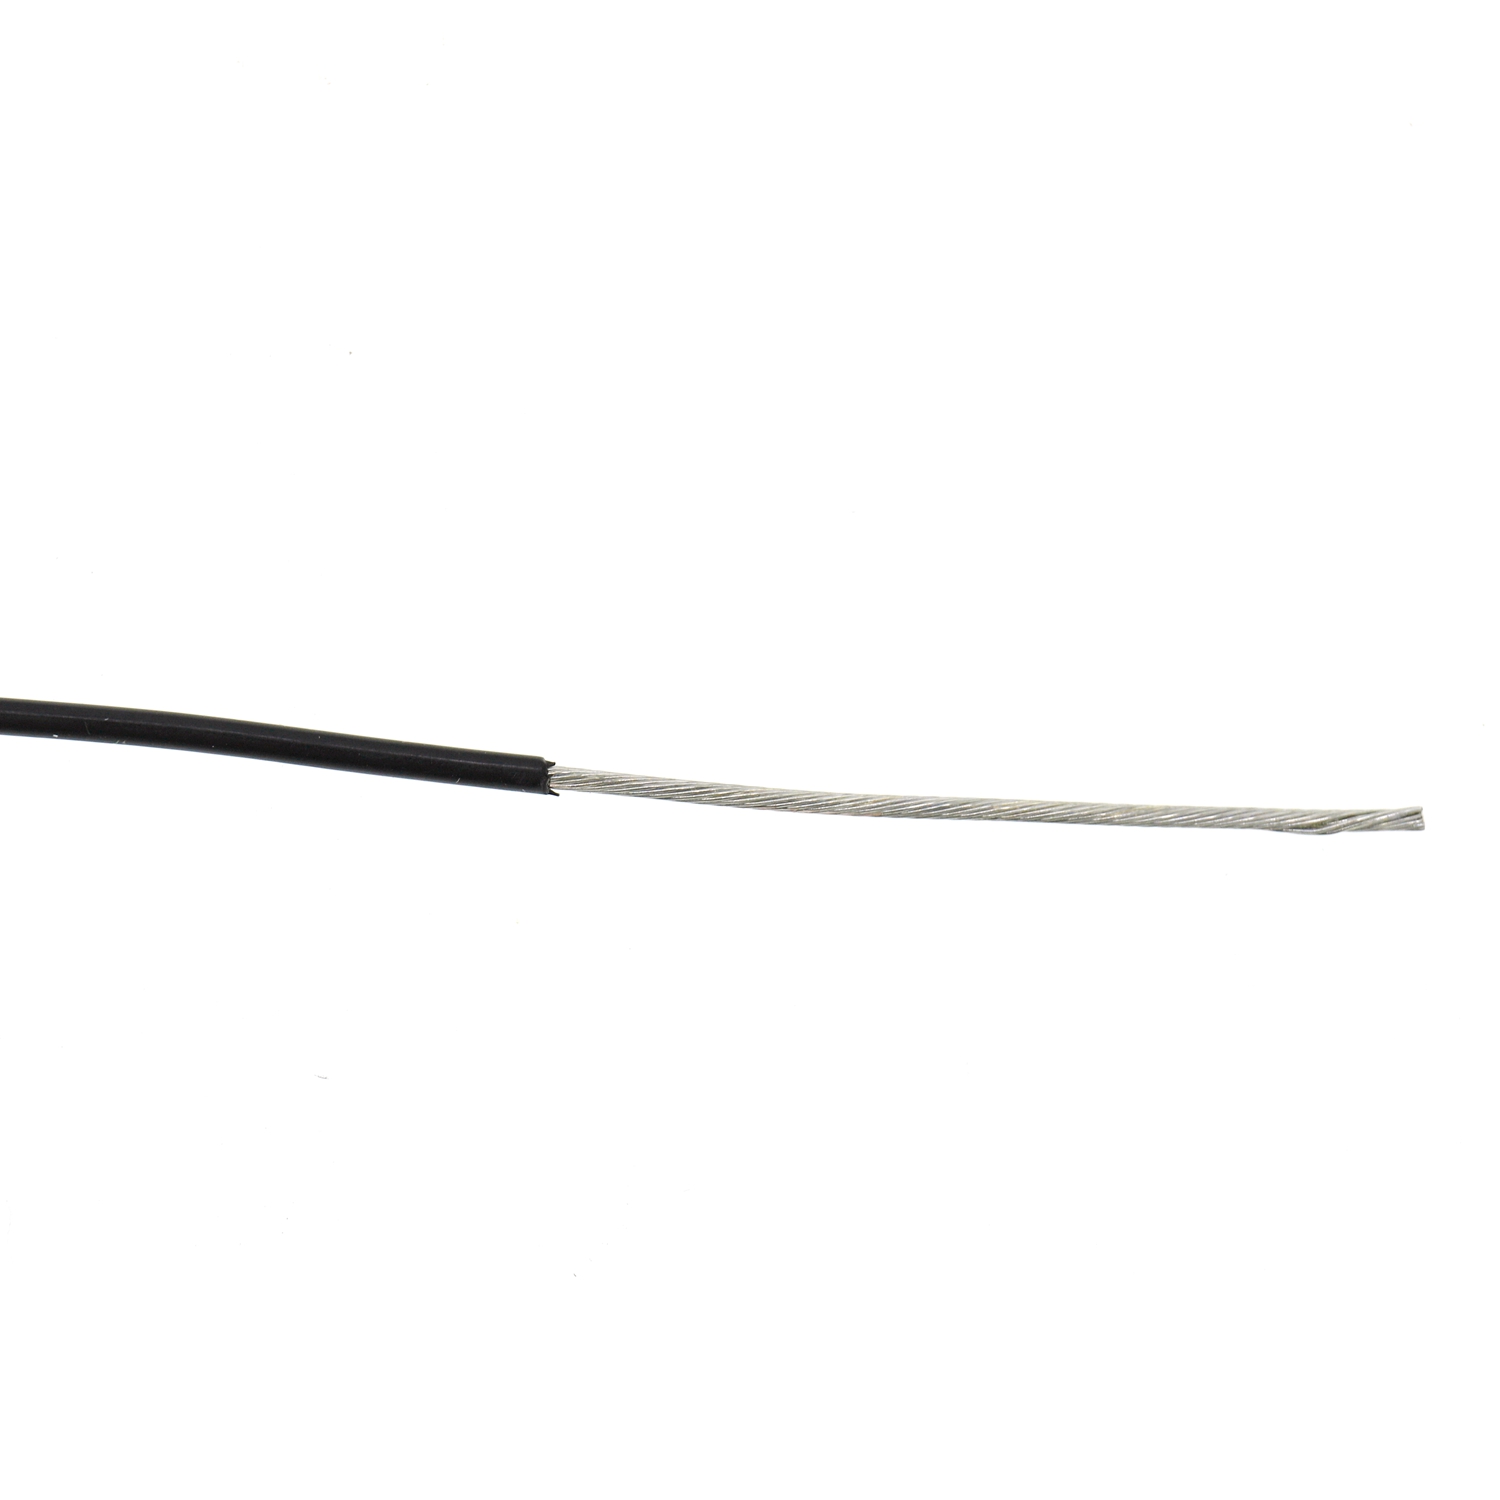 UL1331 FEP 150℃ 600V 26AWG High Temperature Electric Wire 